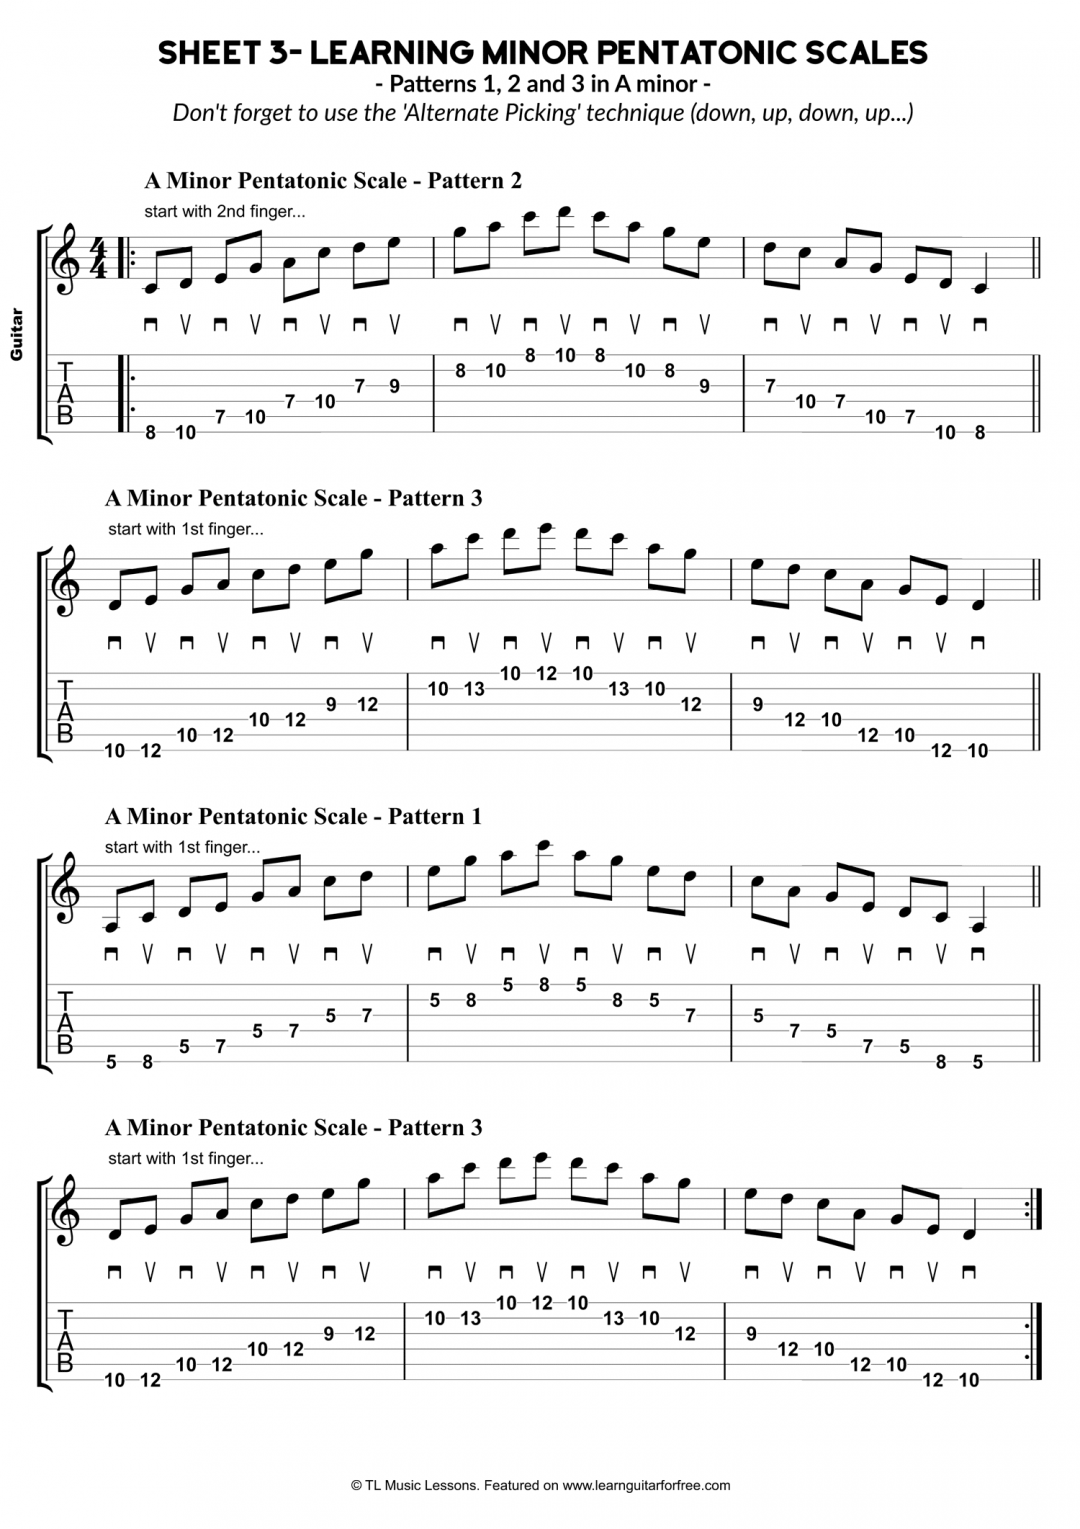 Sheet 3 – Learning Minor Pentatonic Scales – A minor – Patterns 1, 2 and 3